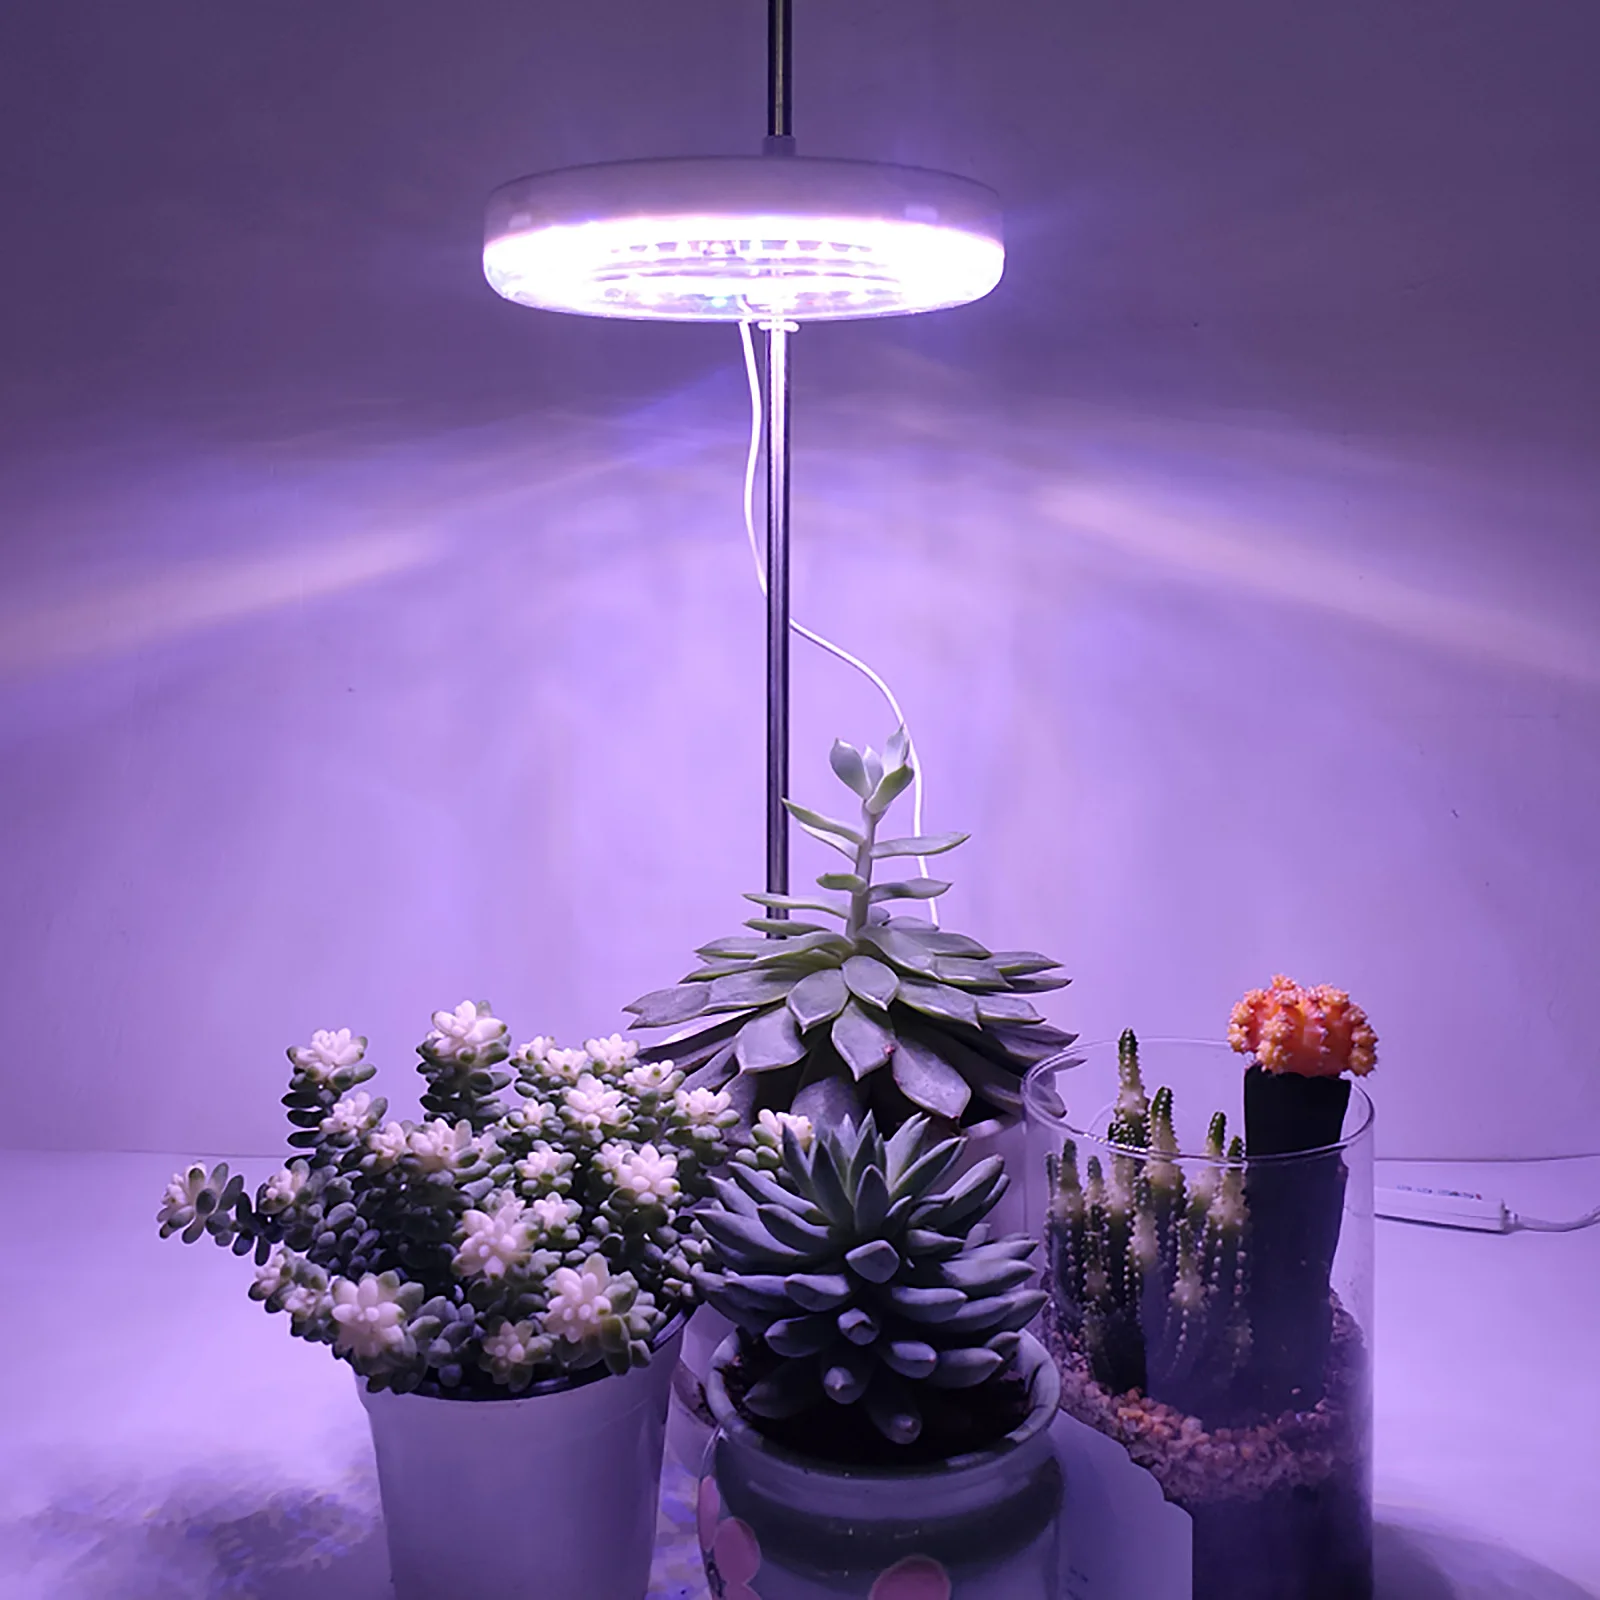 Double Spectrum Timer LED Plant Growth Light Succulent Green Leafy Indoor Greenhouse Lighting Growing Lamps